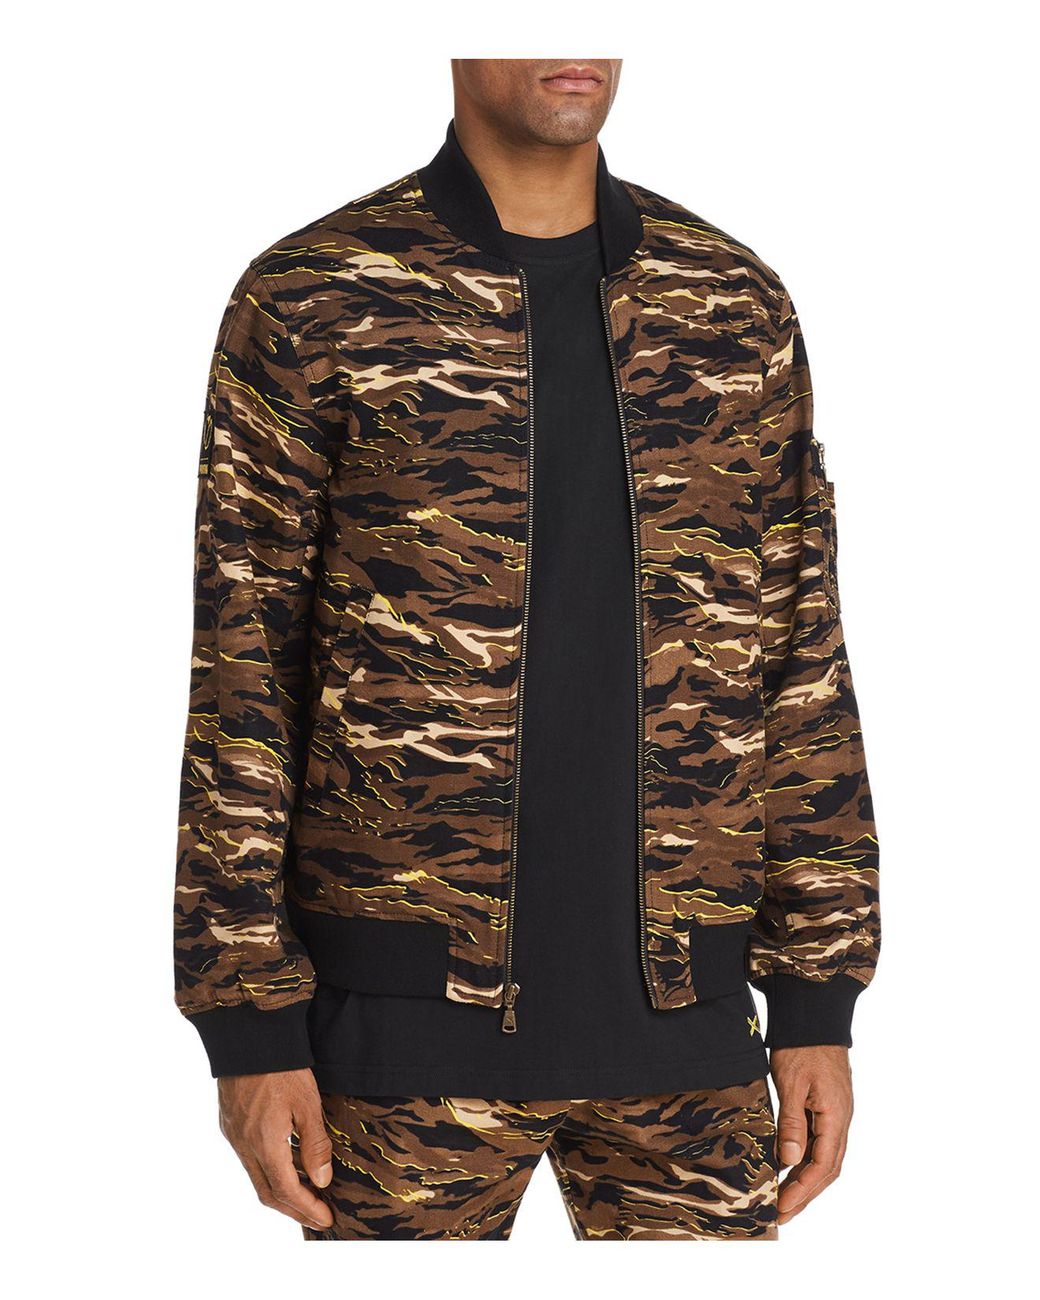 PUMA X Xo The Weeknd Camouflage Bomber Jacket for Men | Lyst